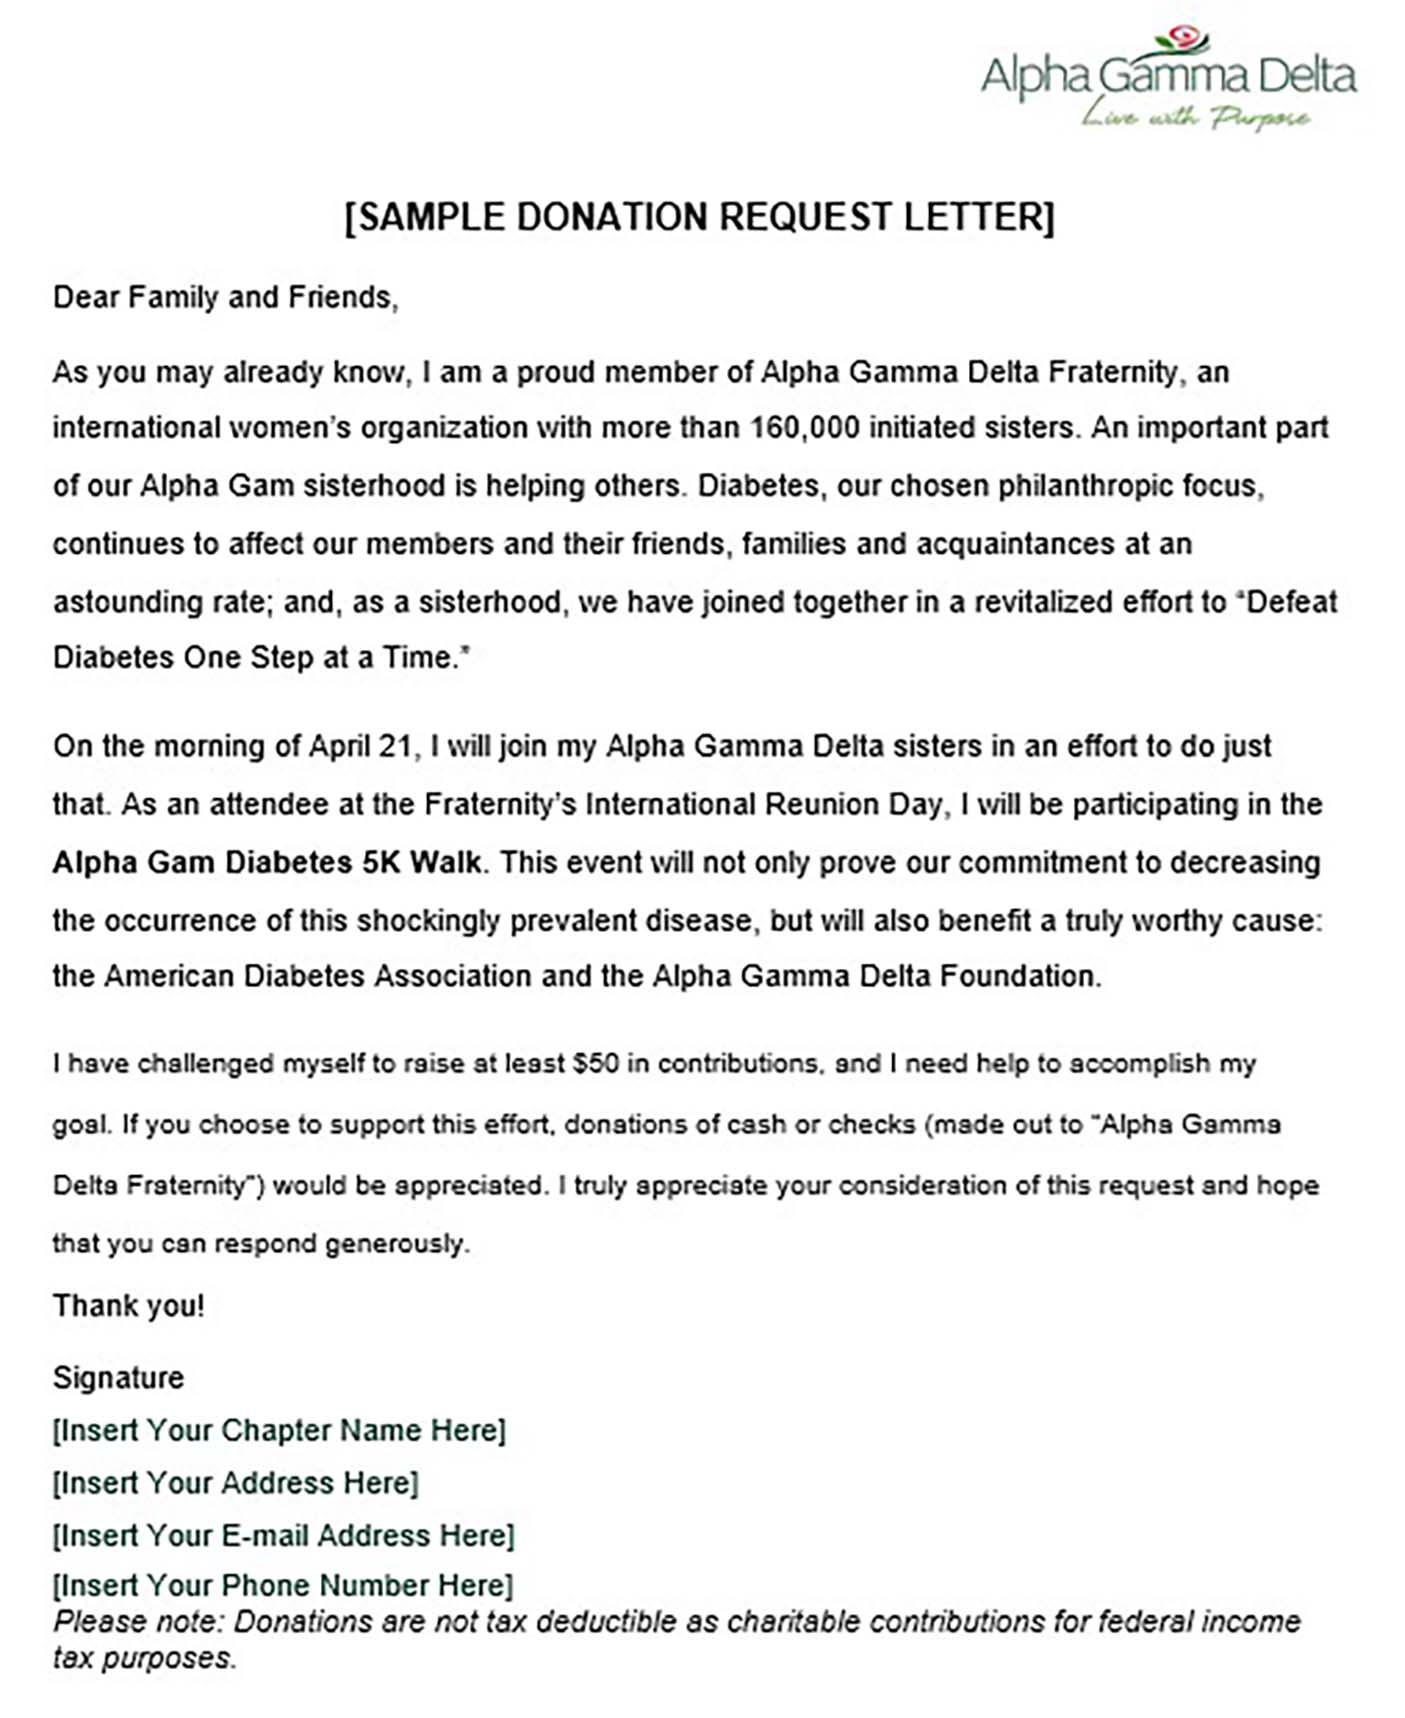 Sample Donation Request Letter